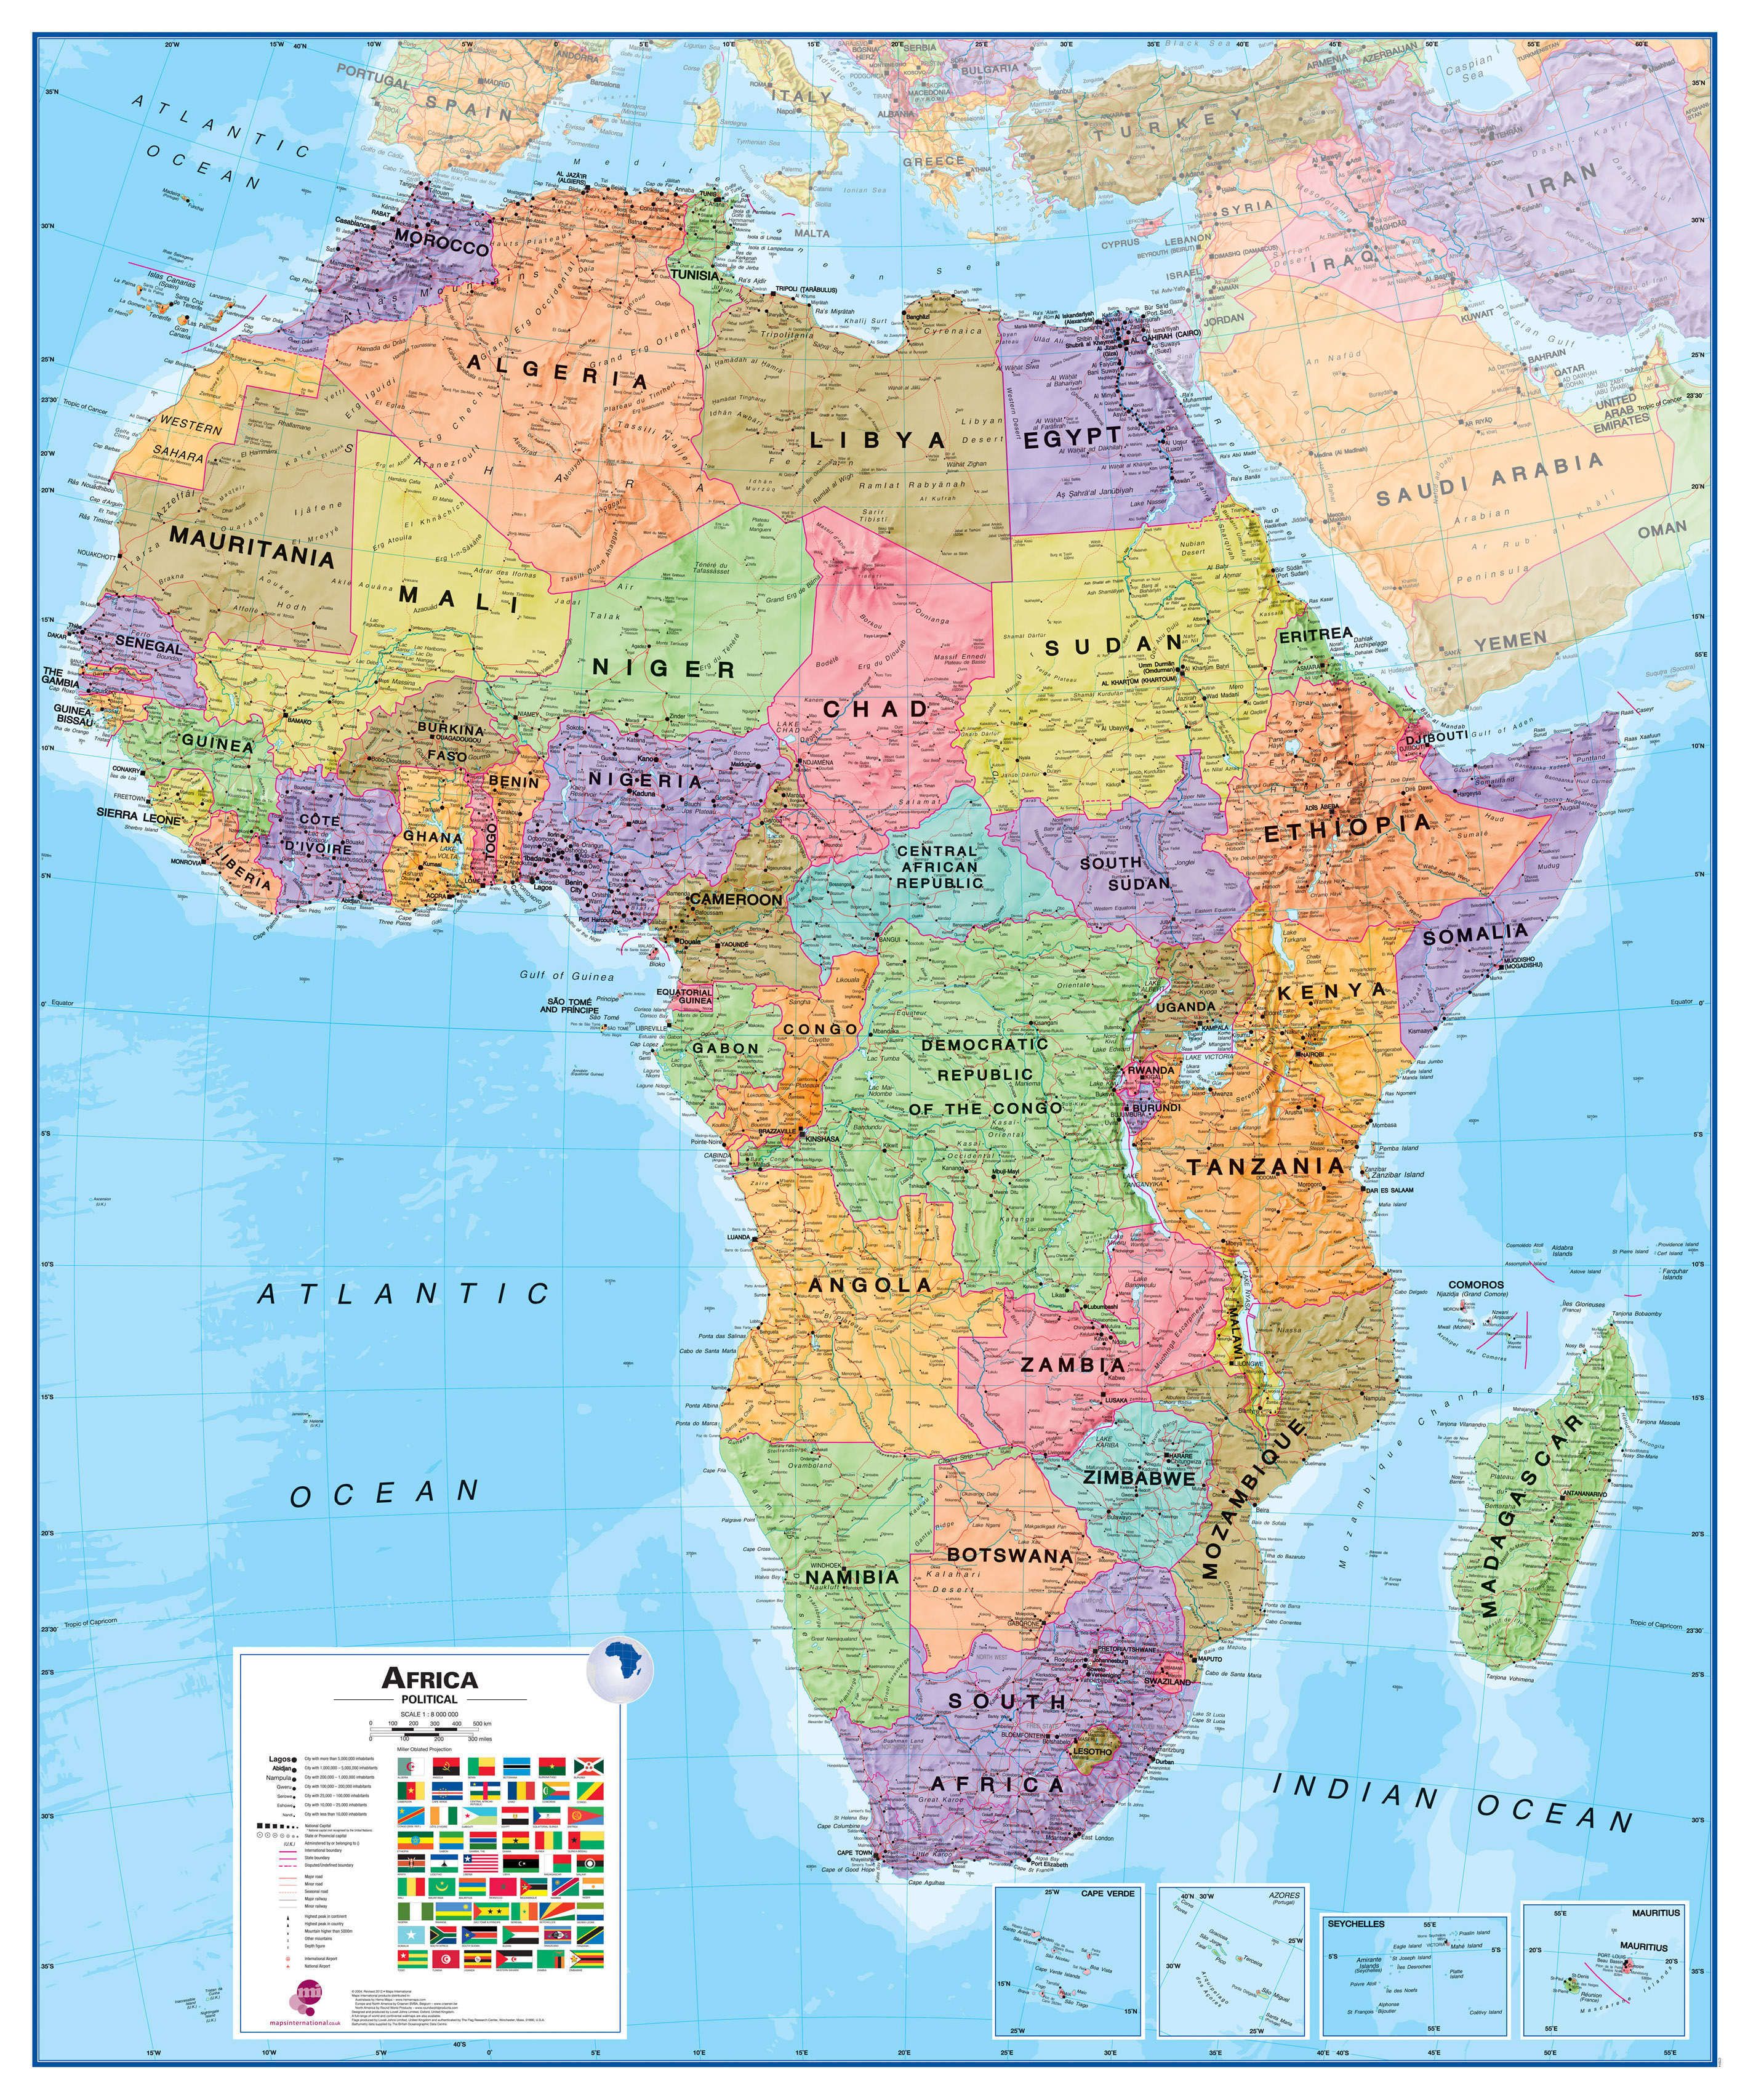 Africa Continent Map Africa Continent Map With States And Modern